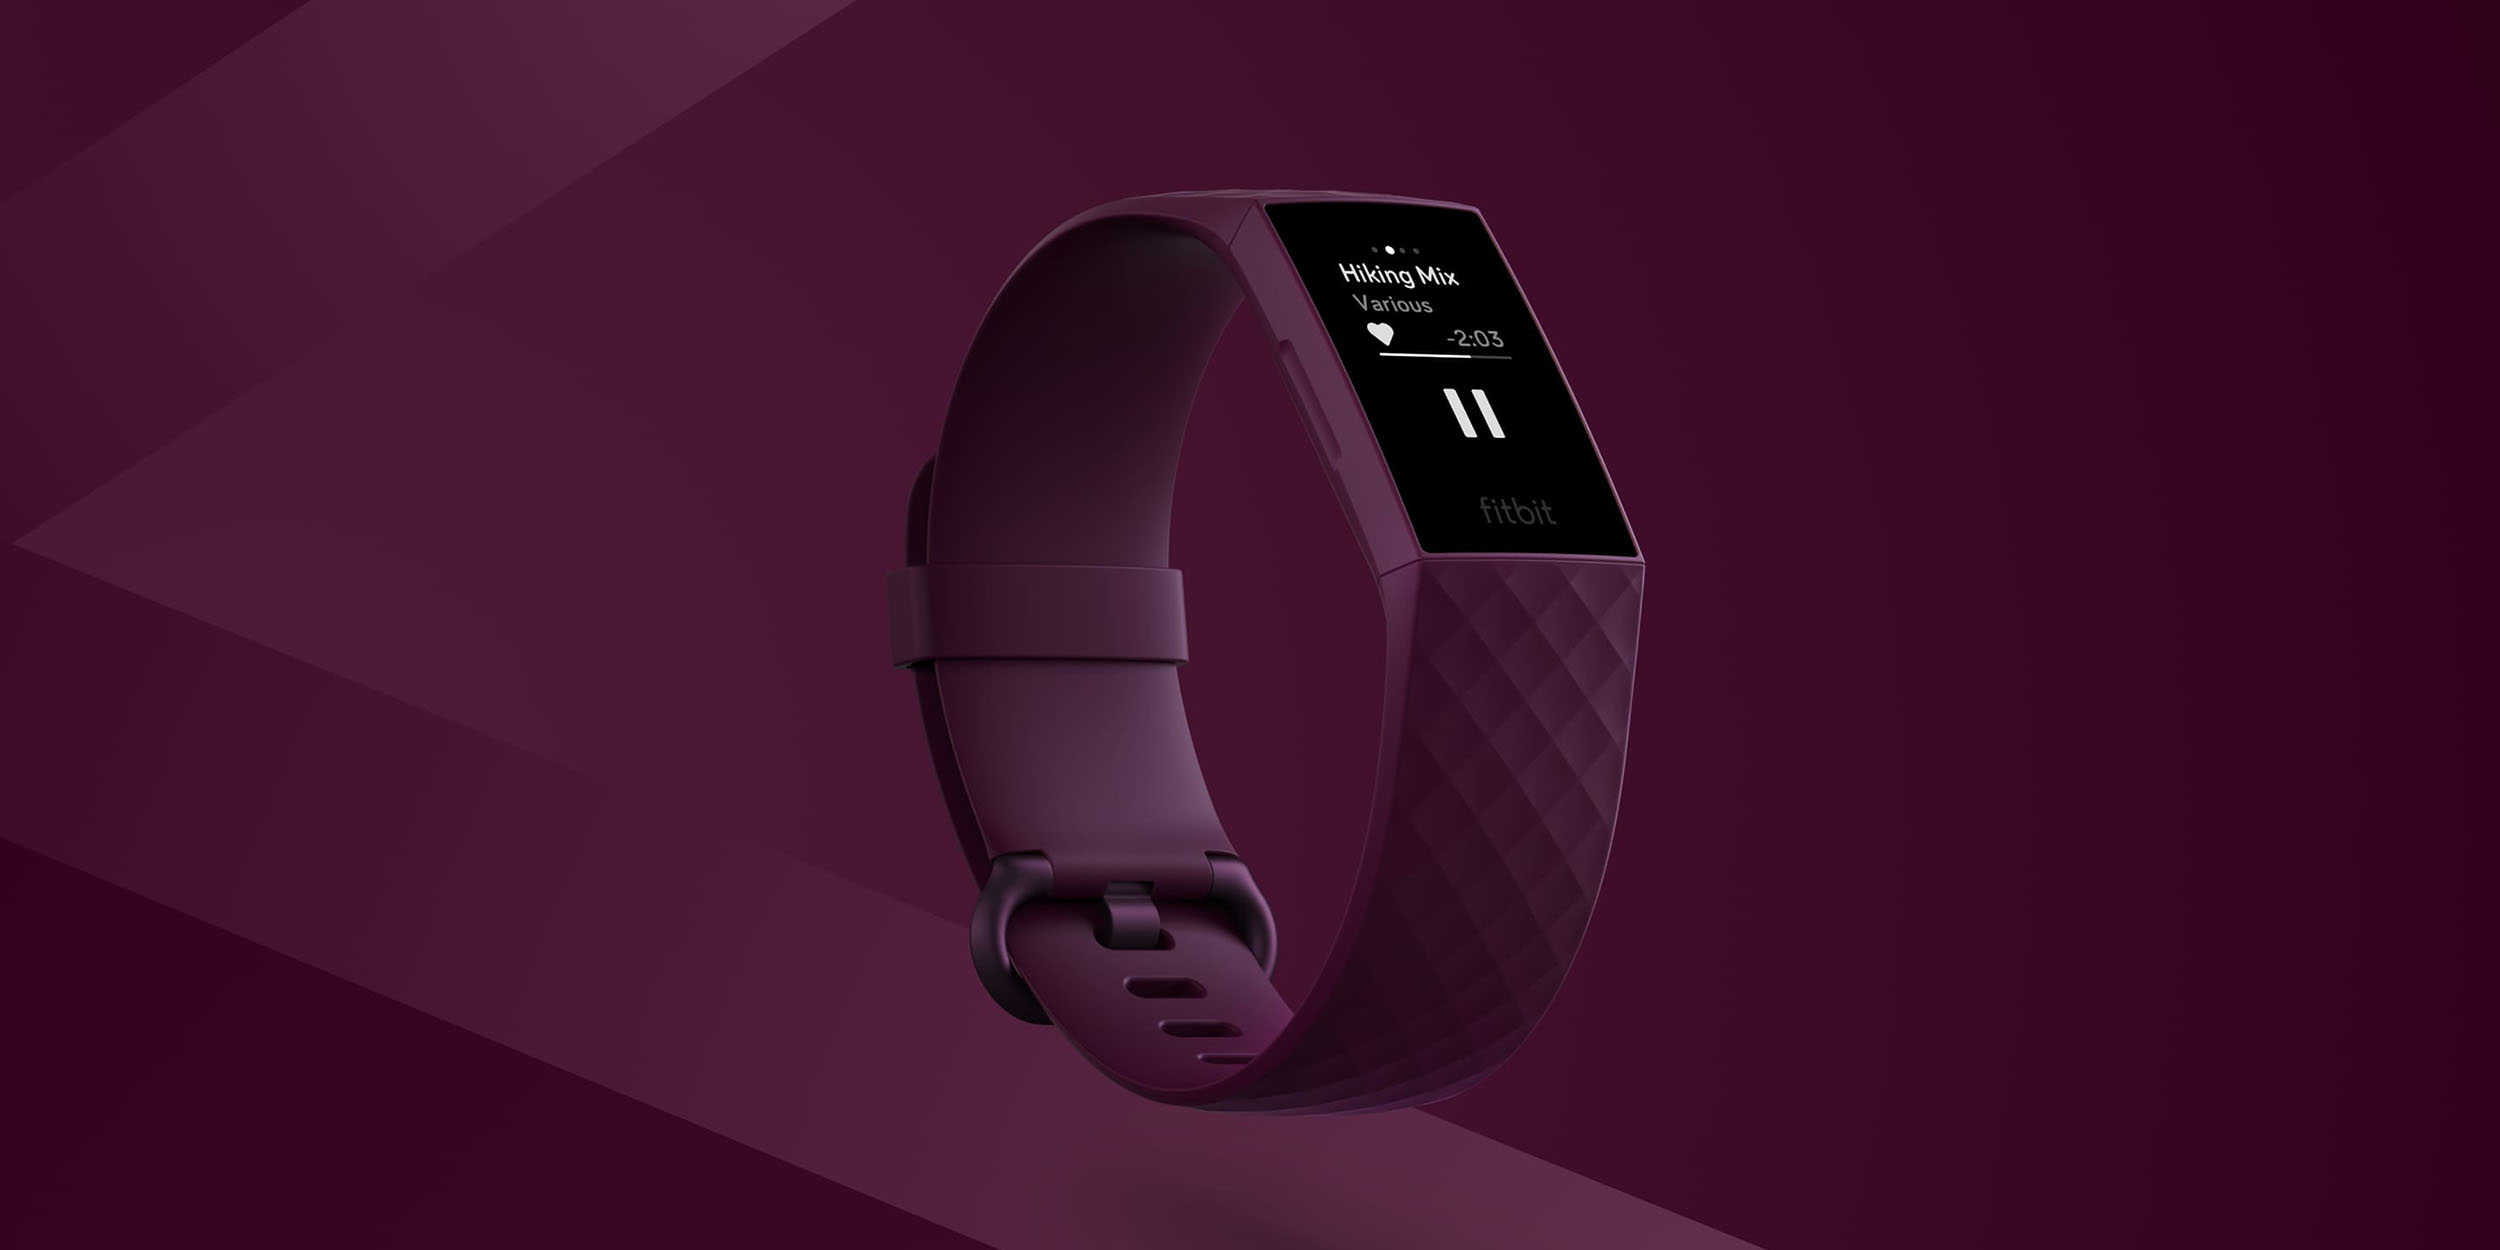 fitbit charge 3 smart wake